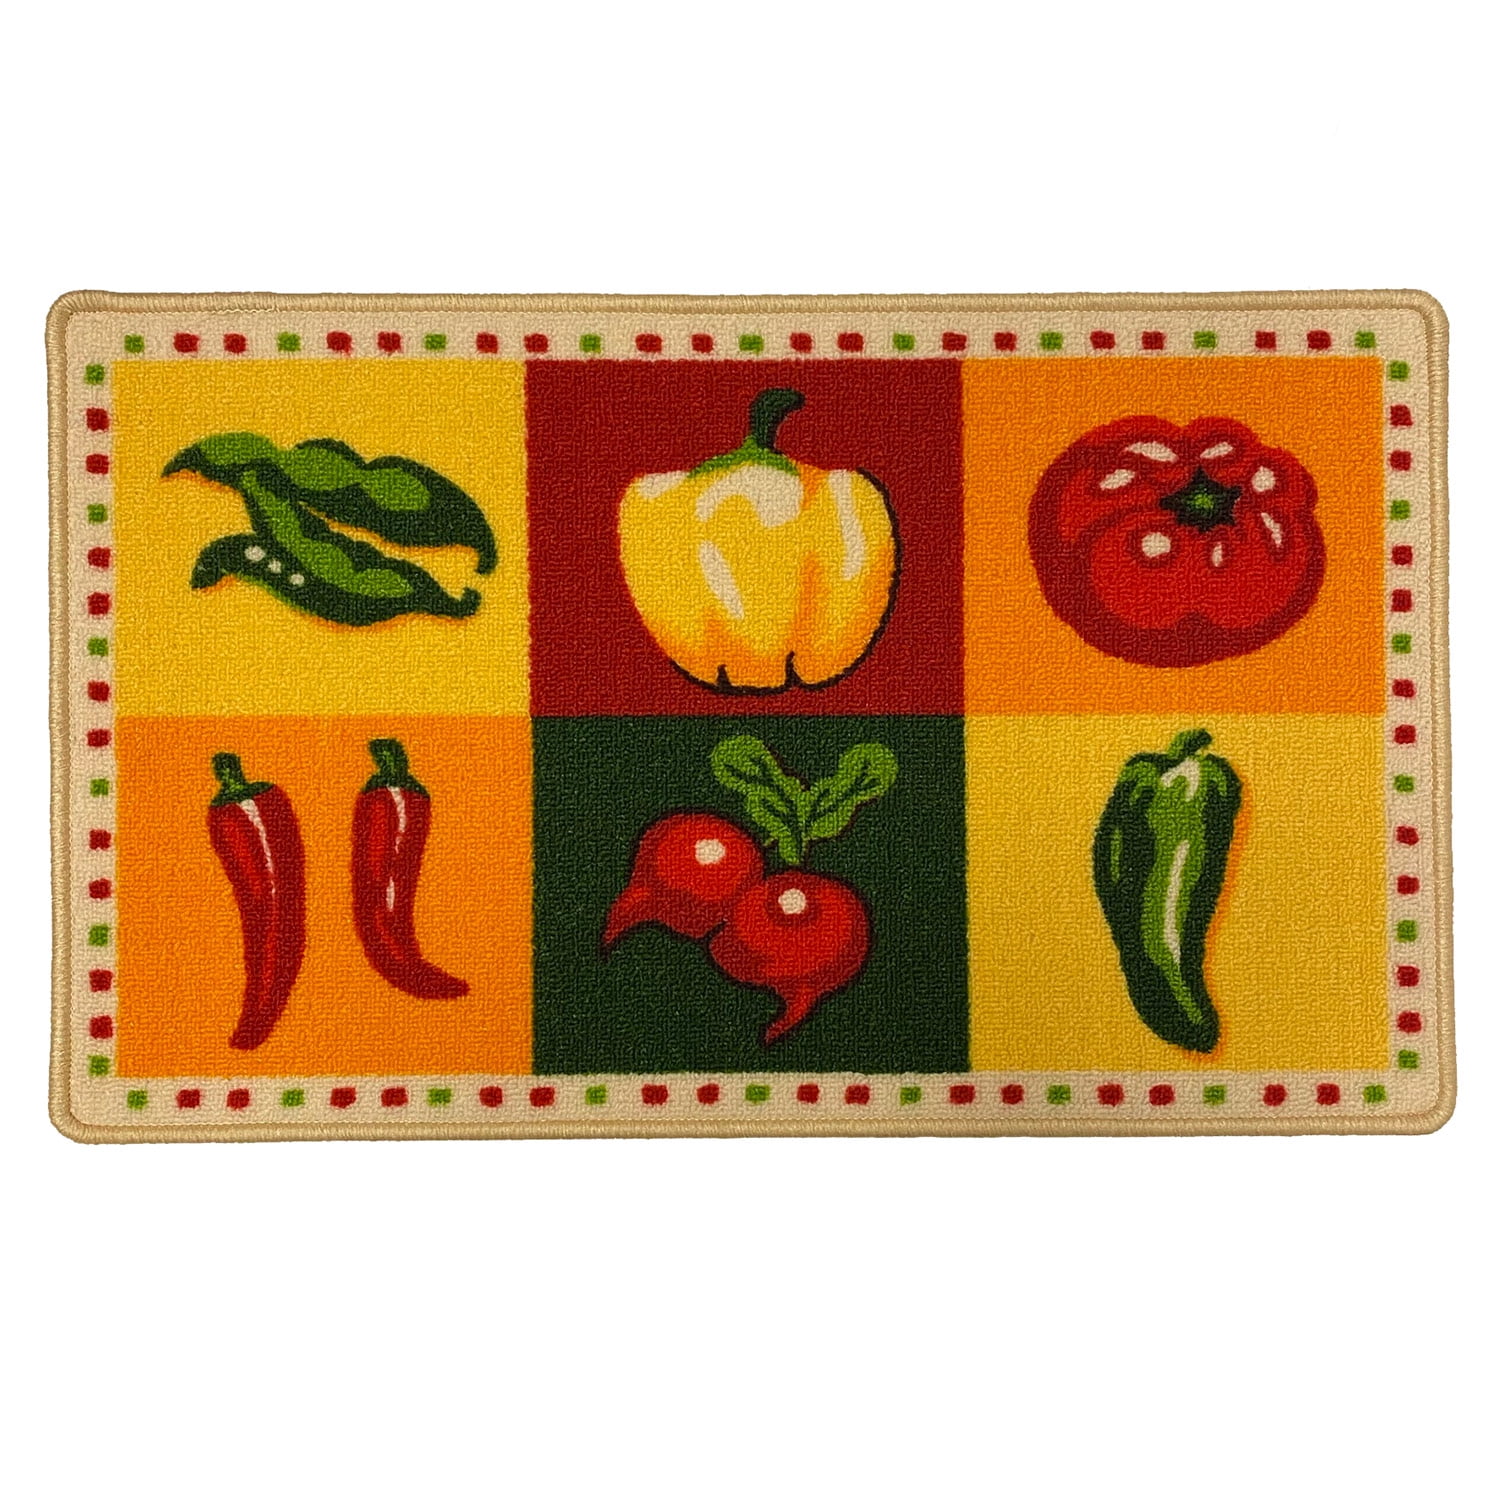 Red Hot Chili Peppers Bath MatBathroom Kitchen Decor RugSpicy Red Pepper 